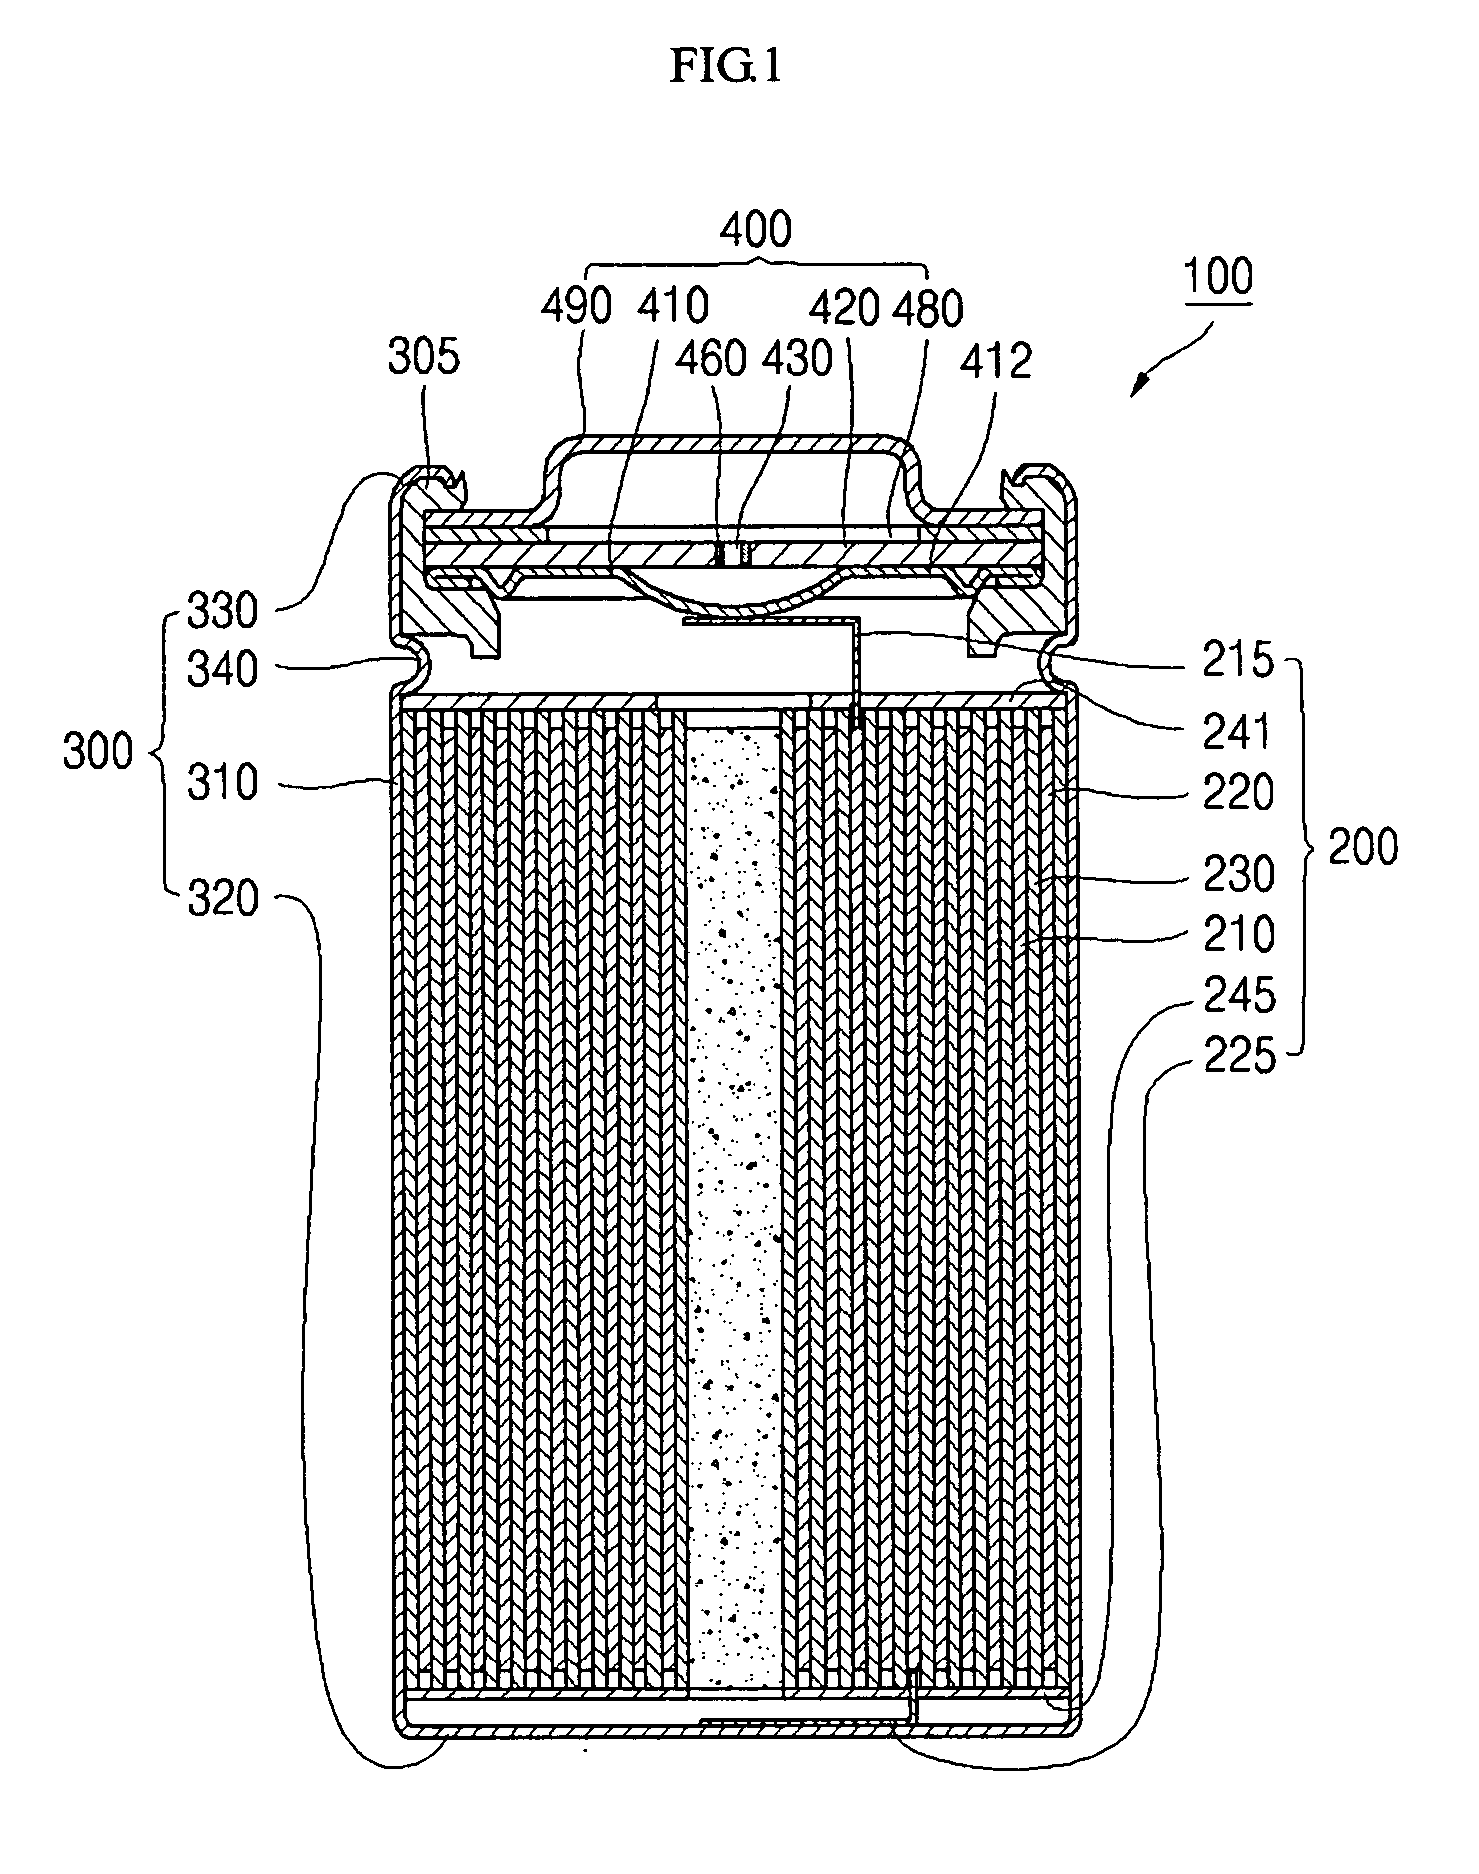 Lithium secondary battery